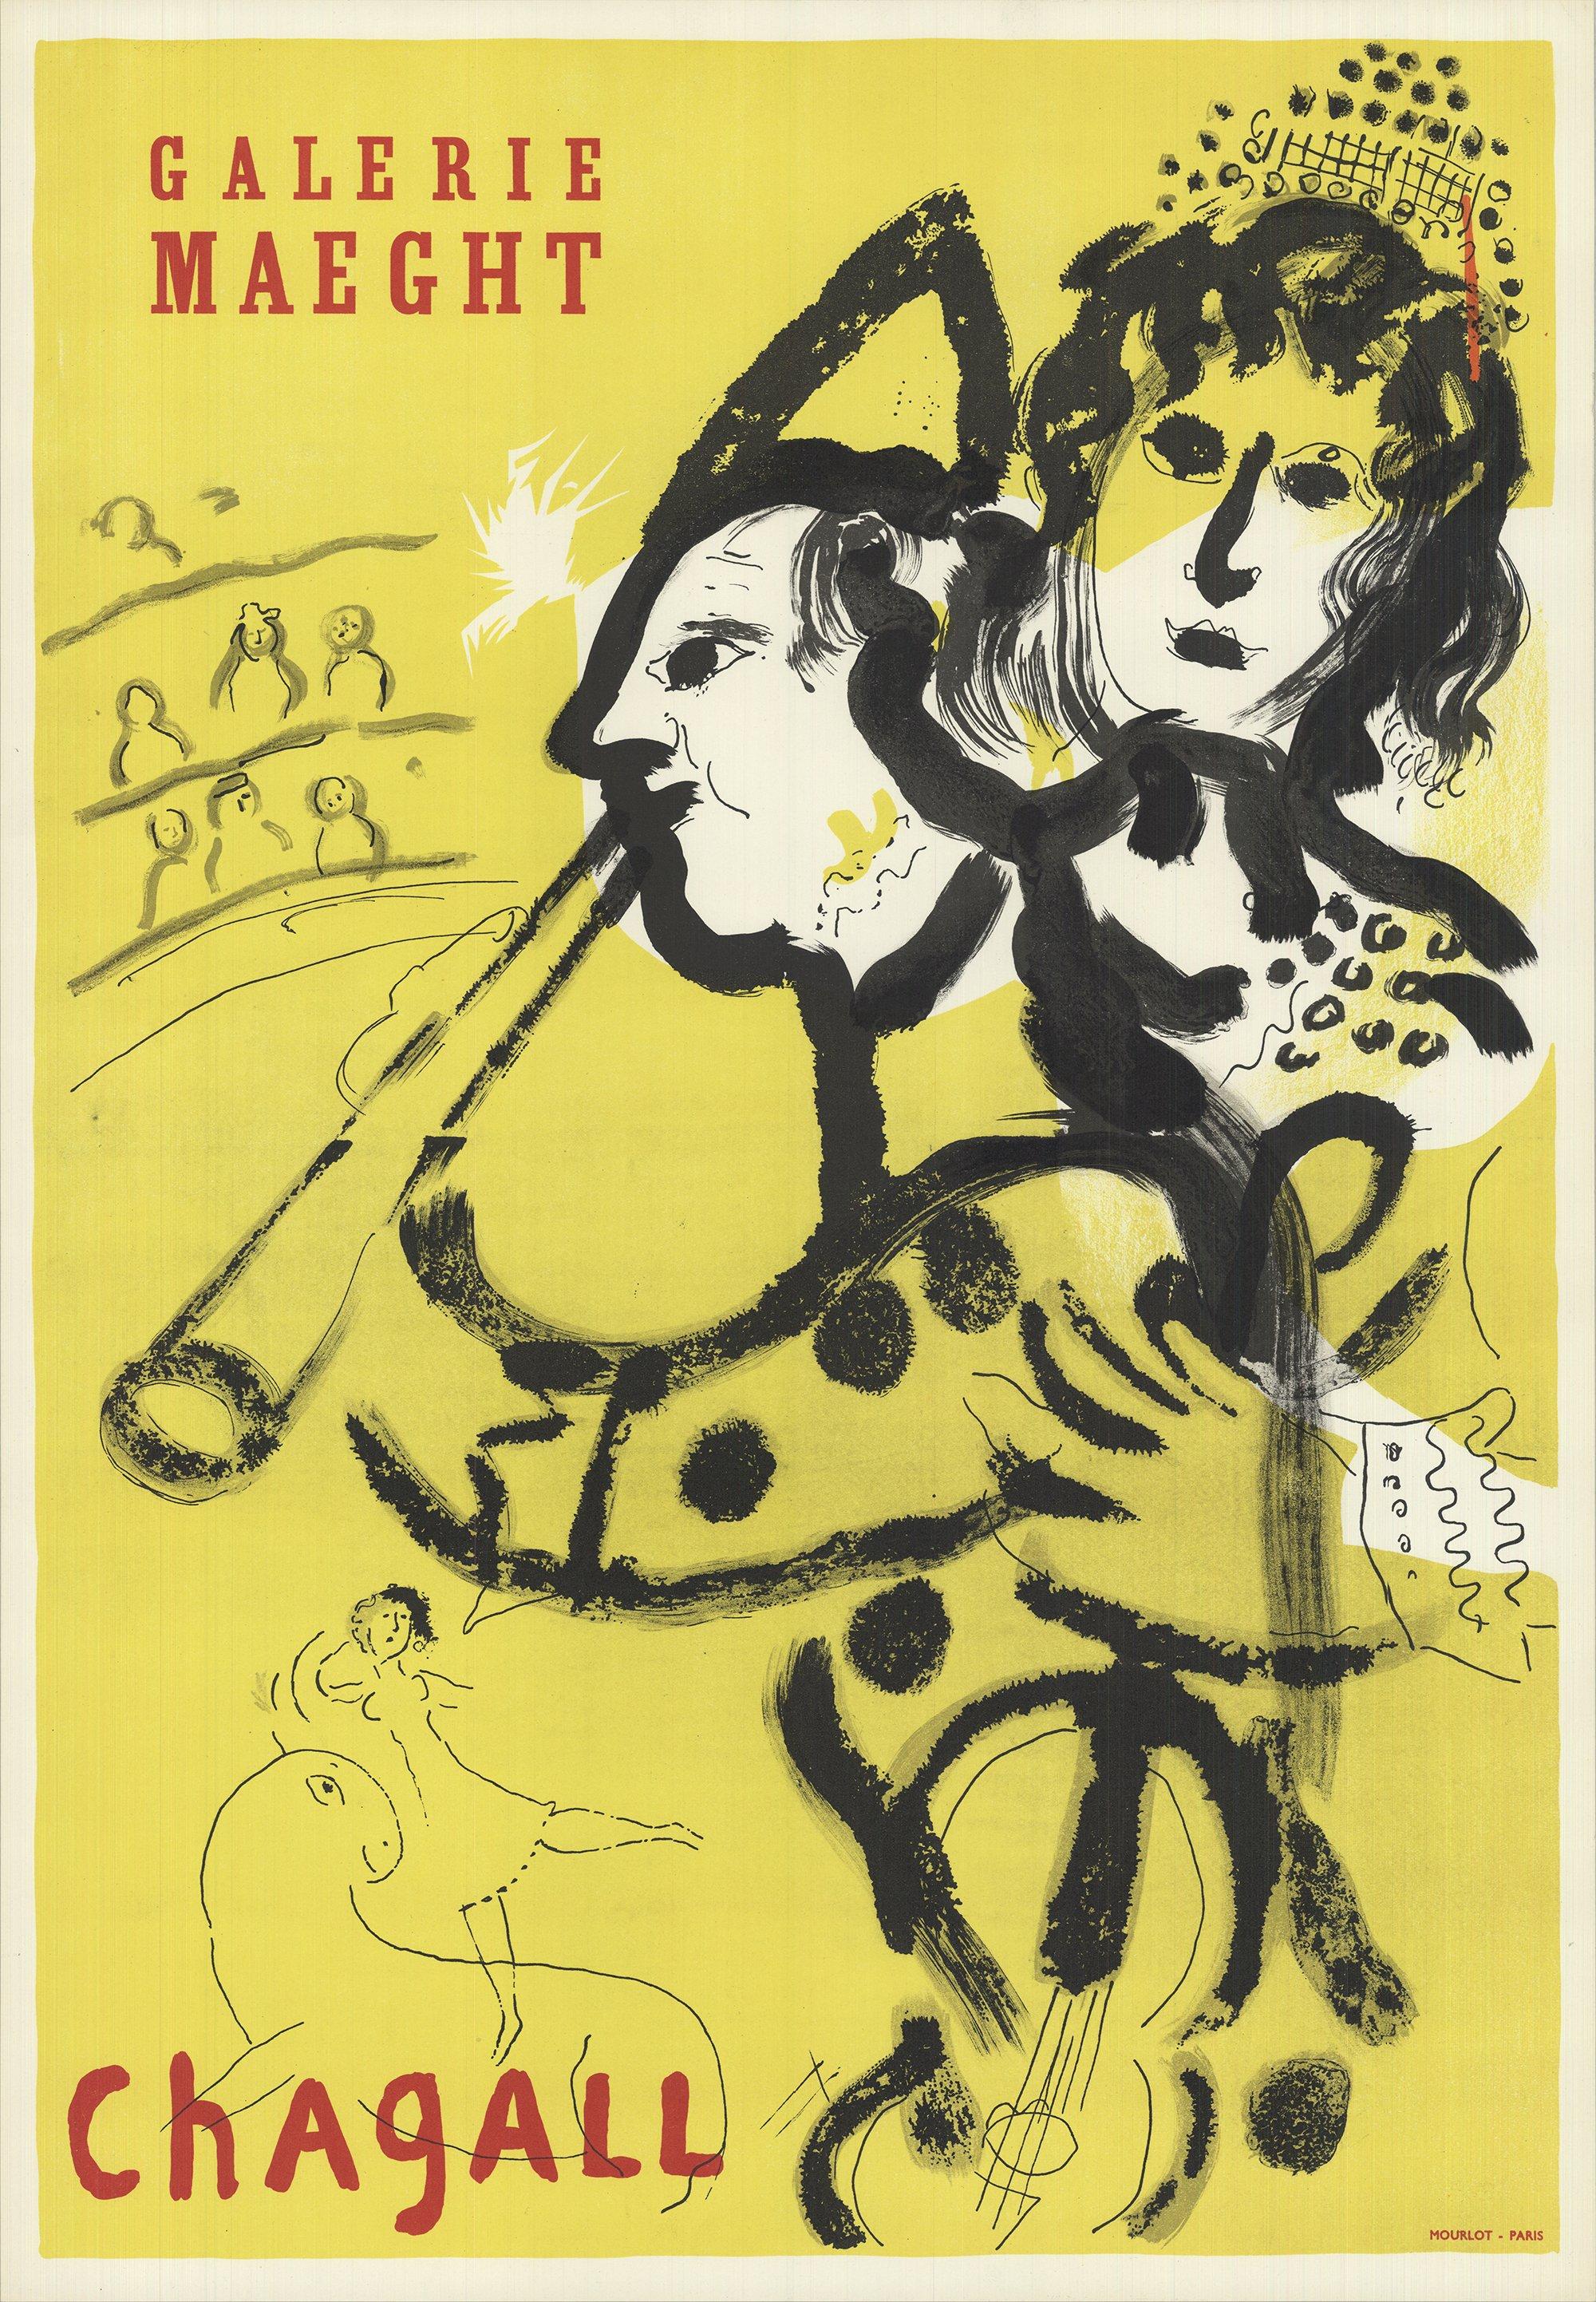 MARC CHAGALL Galerie Maeght 12.5" x 9.25" Lithograph 1959 Modernism Yellow 